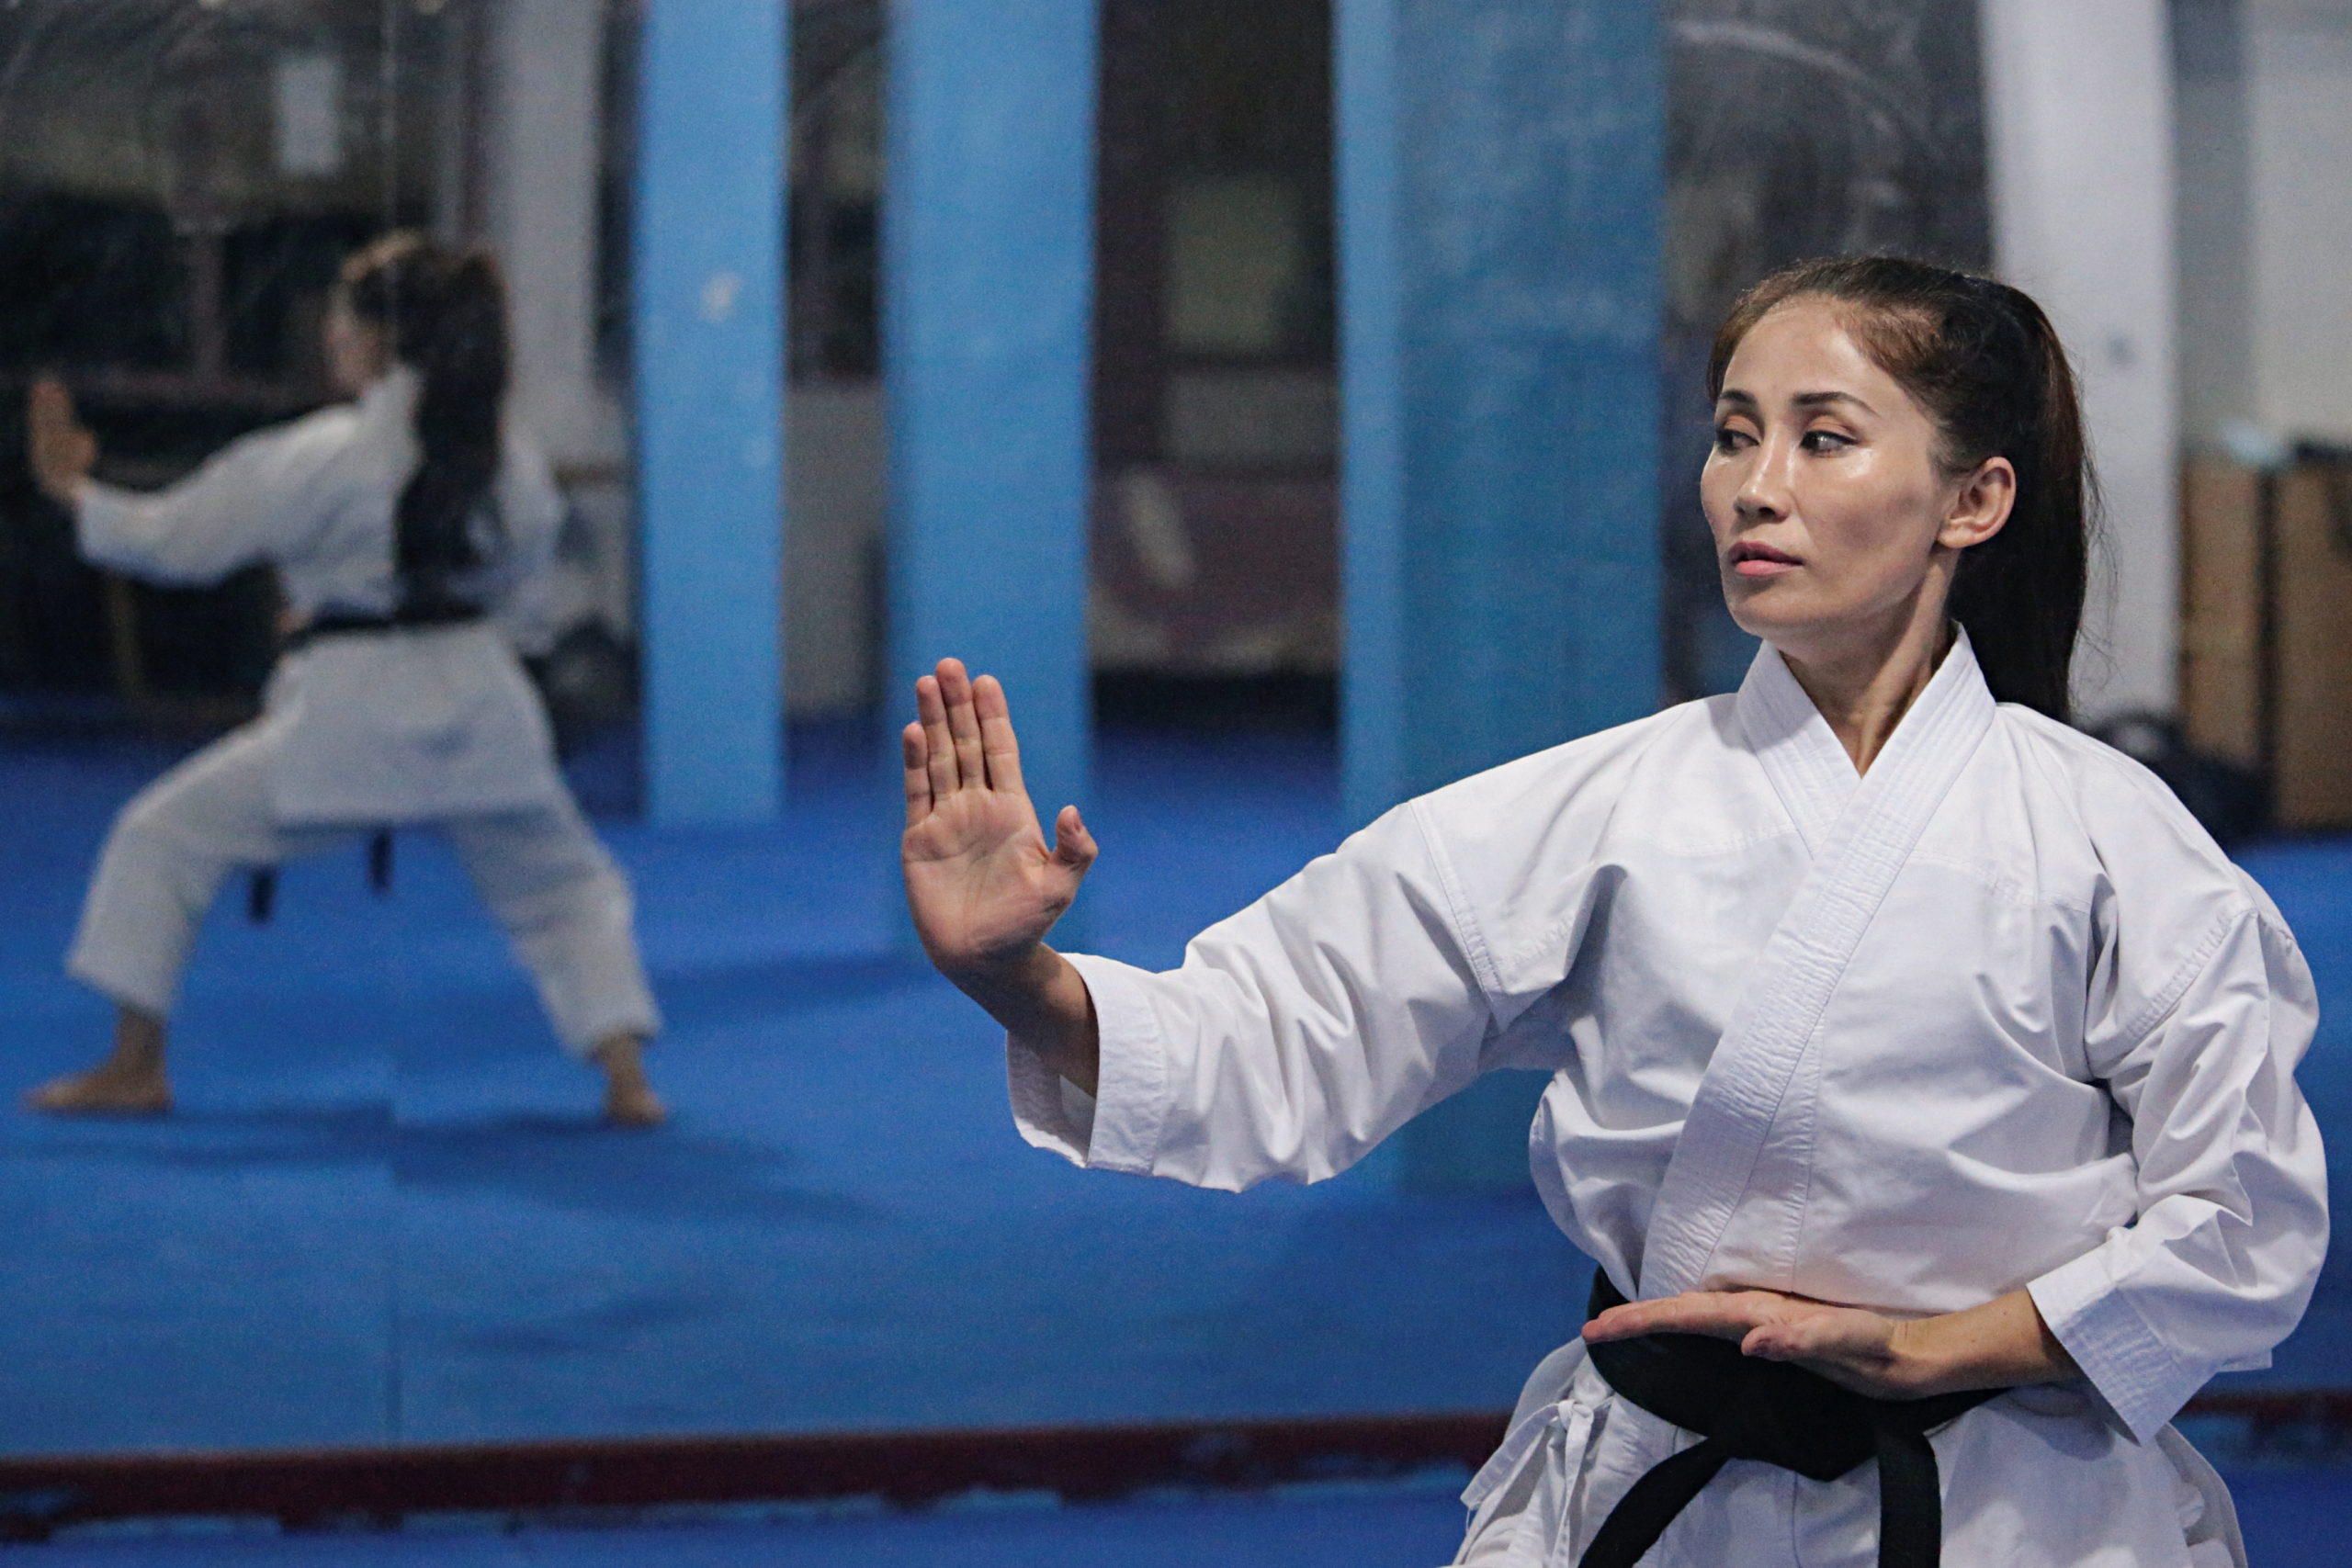 Meena Asadi, a 28-year-old former Afghan martial arts athlete practices karate at the Refugee Shotokan Club dojo in Cisarua, West Java province, Indonesia, August 18, 2021. Picture taken August 18, 2021. 